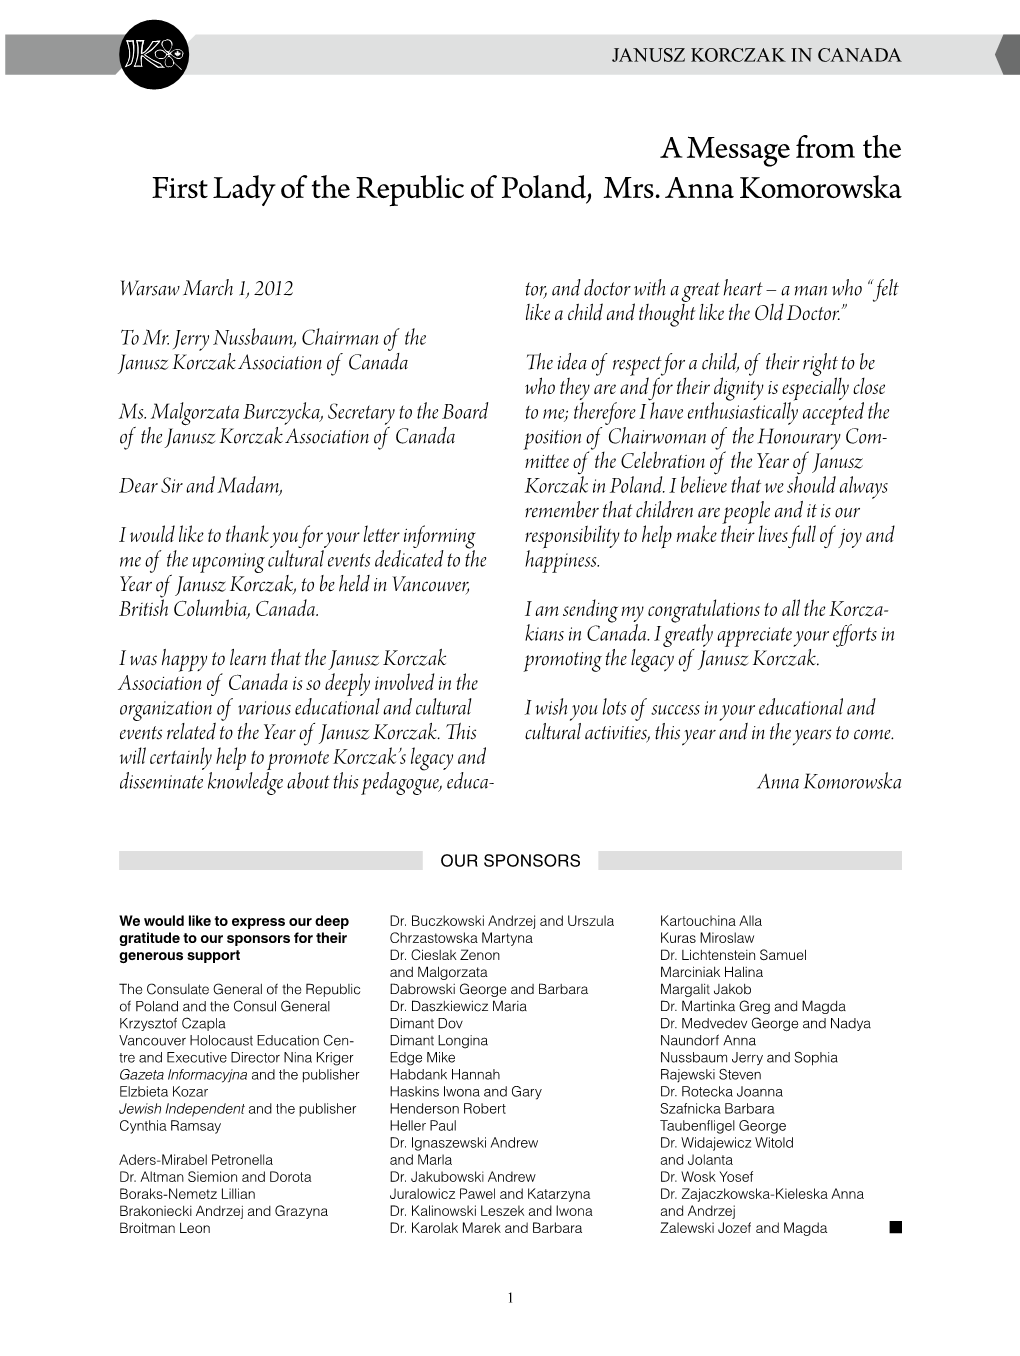 A Message from the First Lady of the Republic of Poland, Mrs. Anna Komorowska